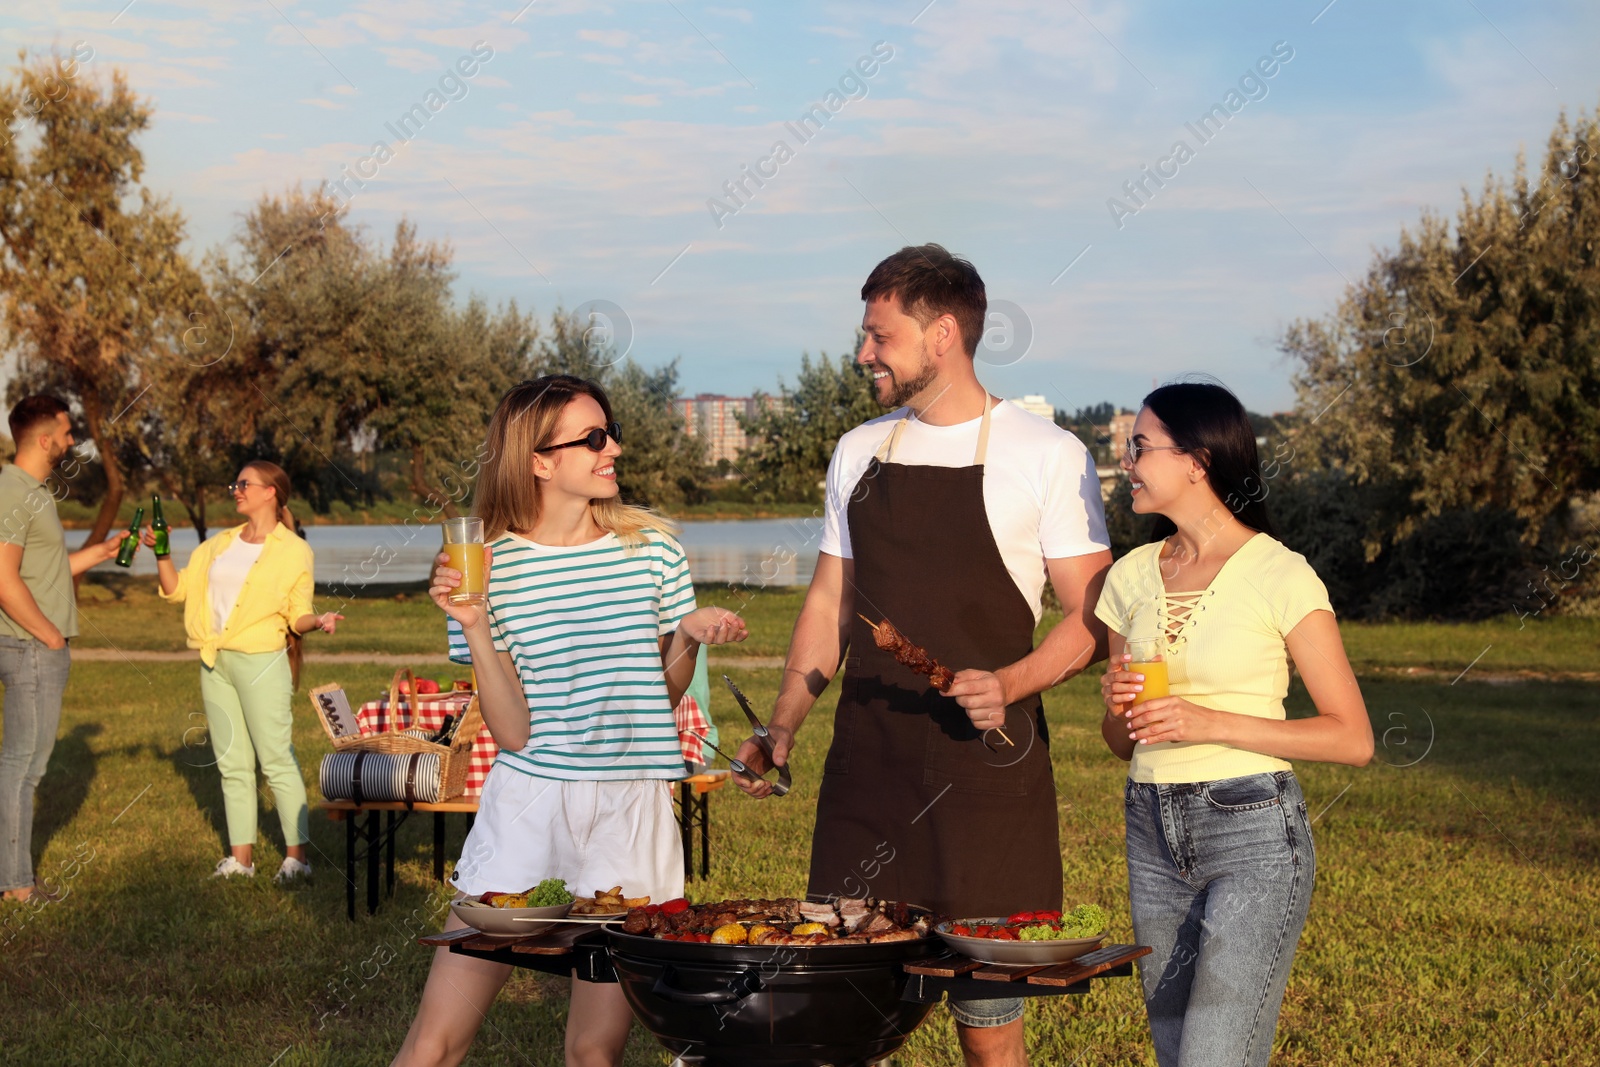 Photo of Group of friends cooking food on barbecue grill in park